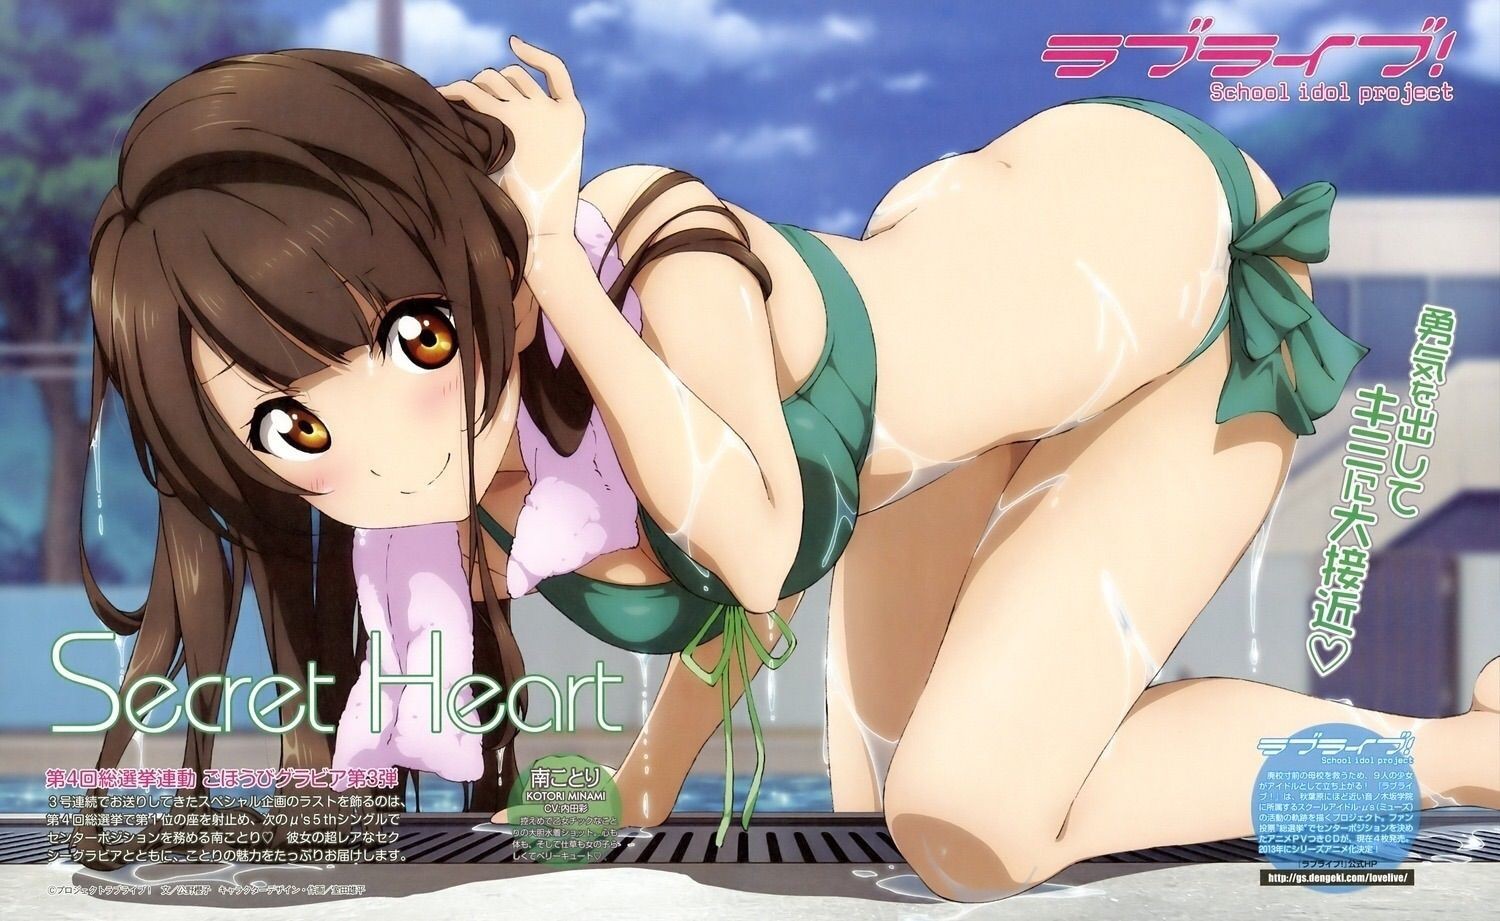 Camsex [Image] "love Live! ' Big Totoro Kotori-Chan And I ○ Want Erotic Too Awesome. Wwwww Gozada